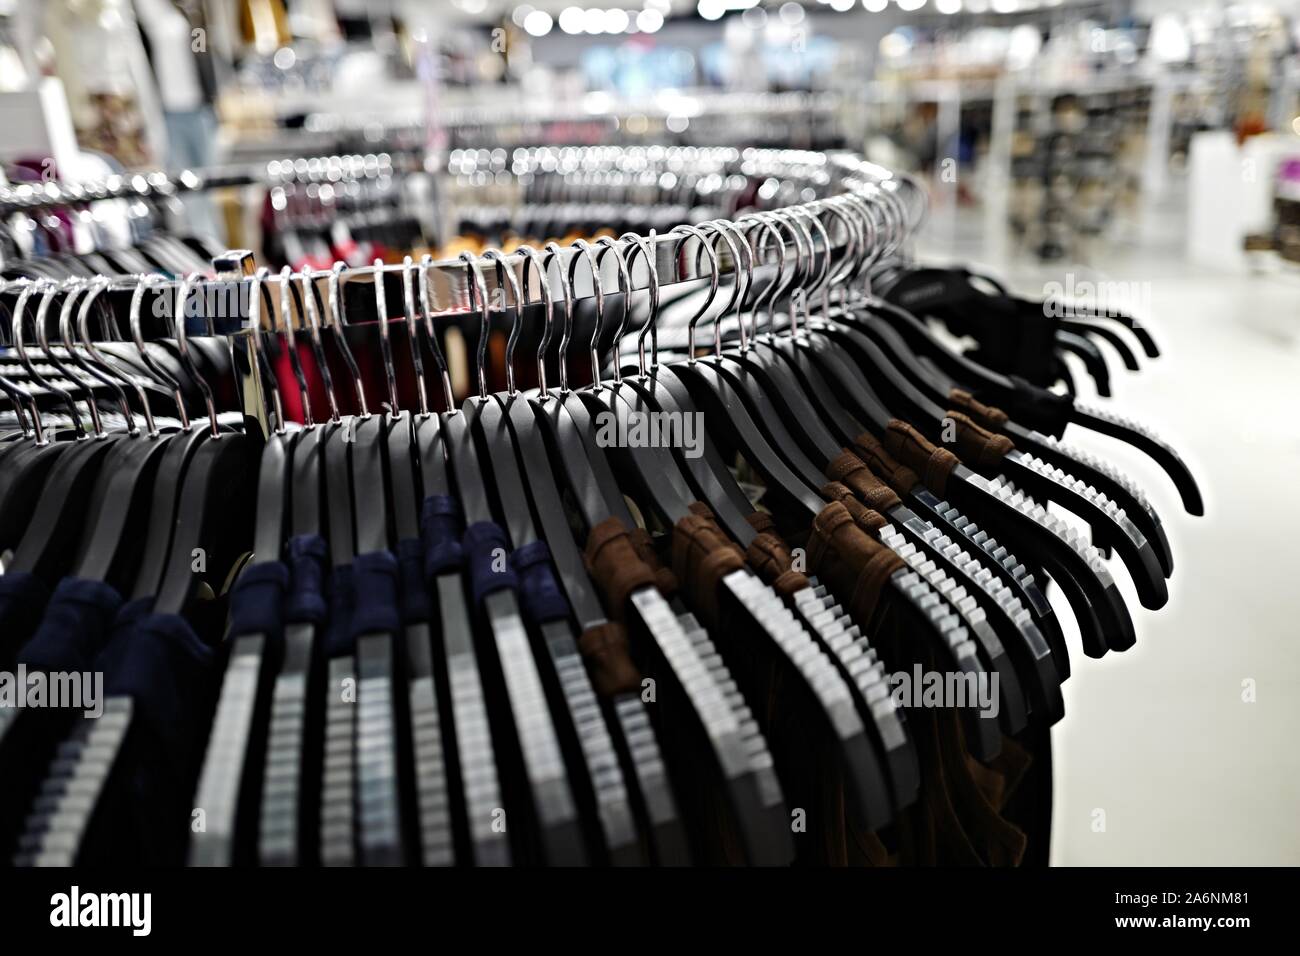 a round display rack of clothing hanging from black plastic hangers inside a brightly lit store Stock Photo